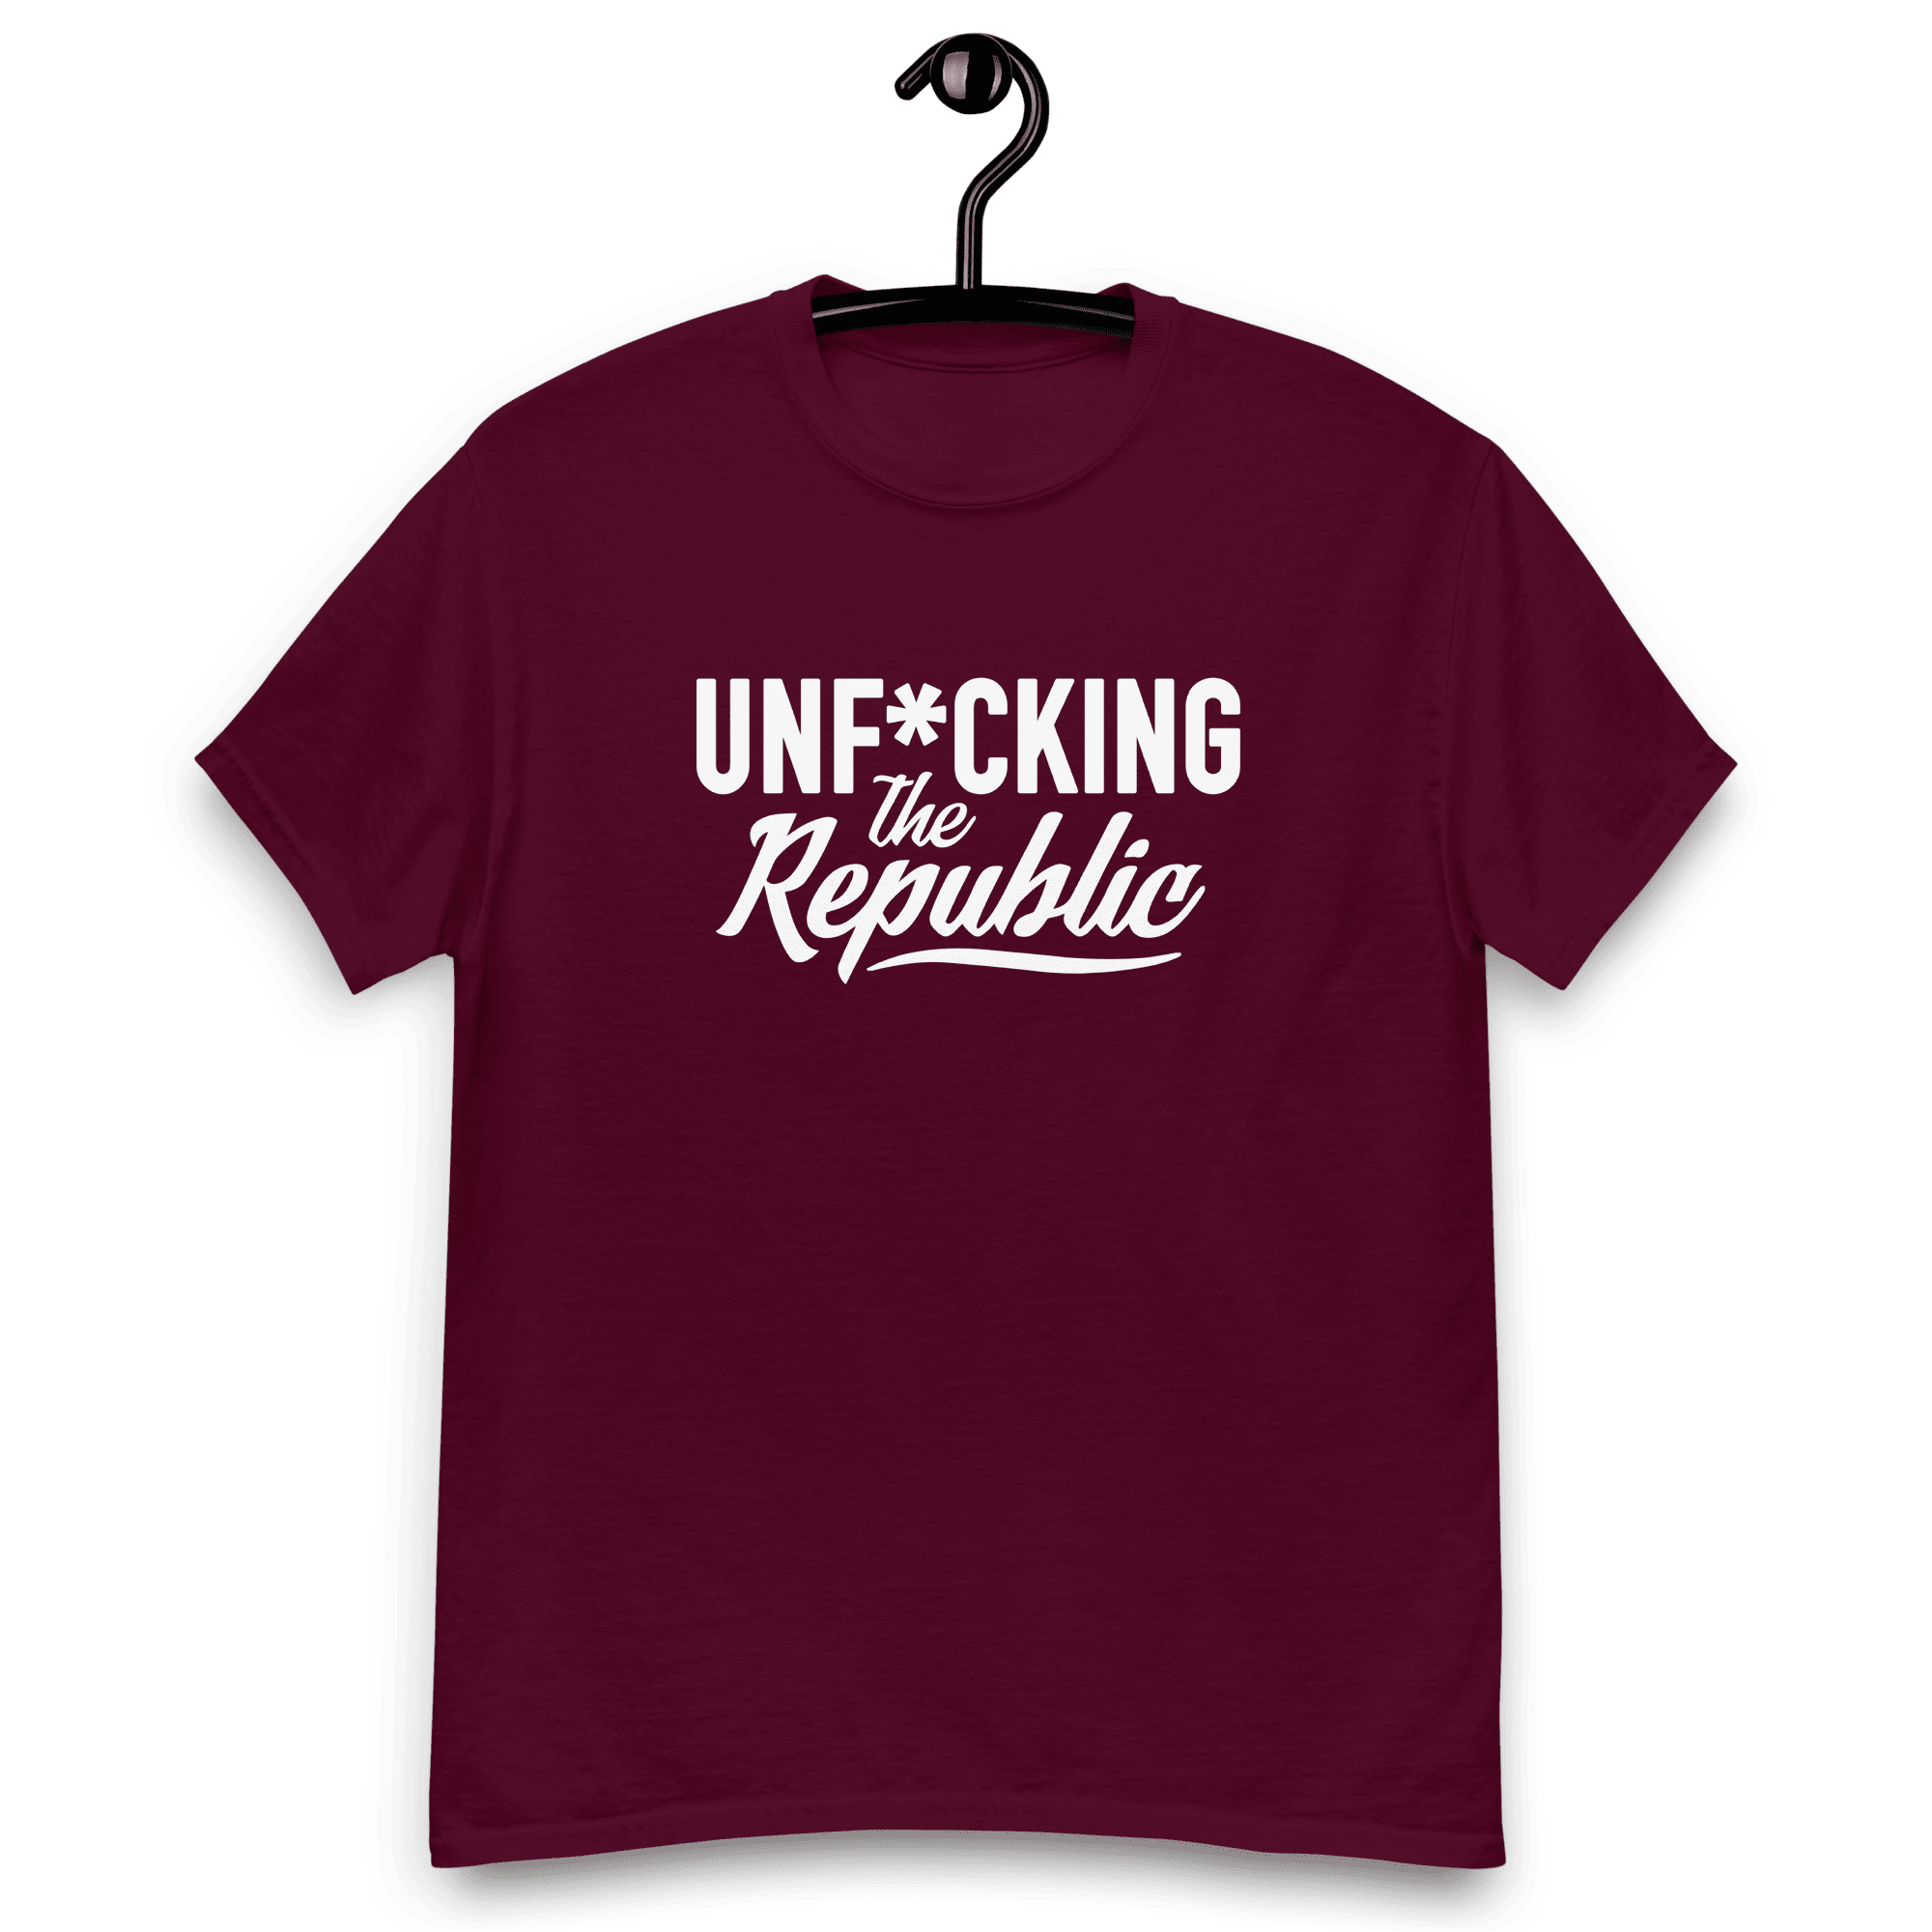 Maroon tee shirt that says Unf*cking The Republic in white on the front and Meeting People Where They Art in white on the back